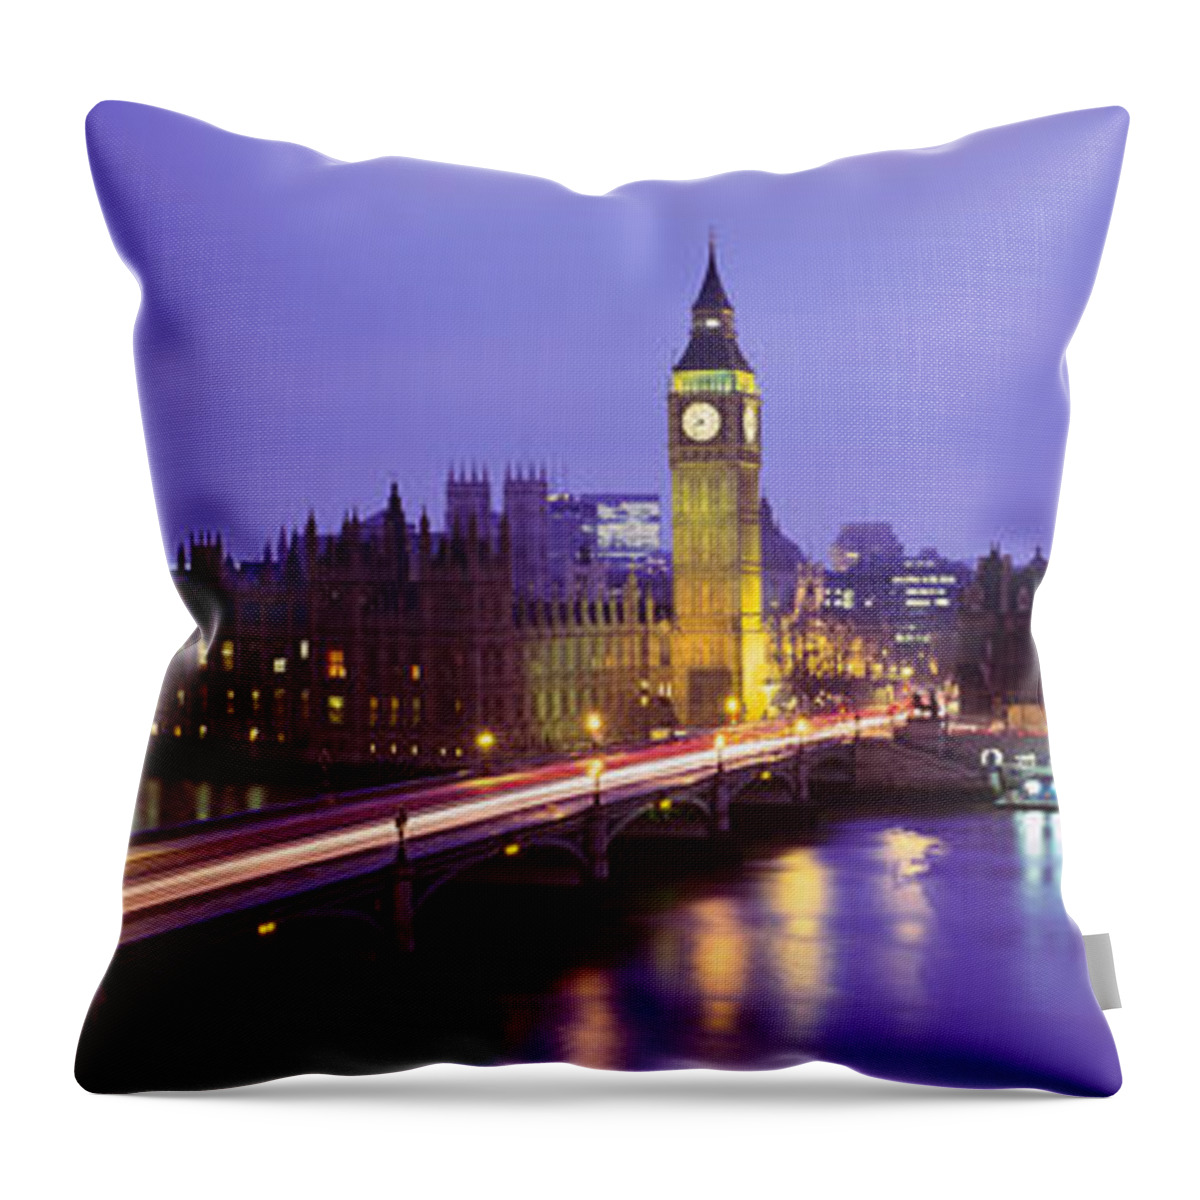 Photography Throw Pillow featuring the photograph Big Ben Lit Up At Dusk, Houses Of by Panoramic Images